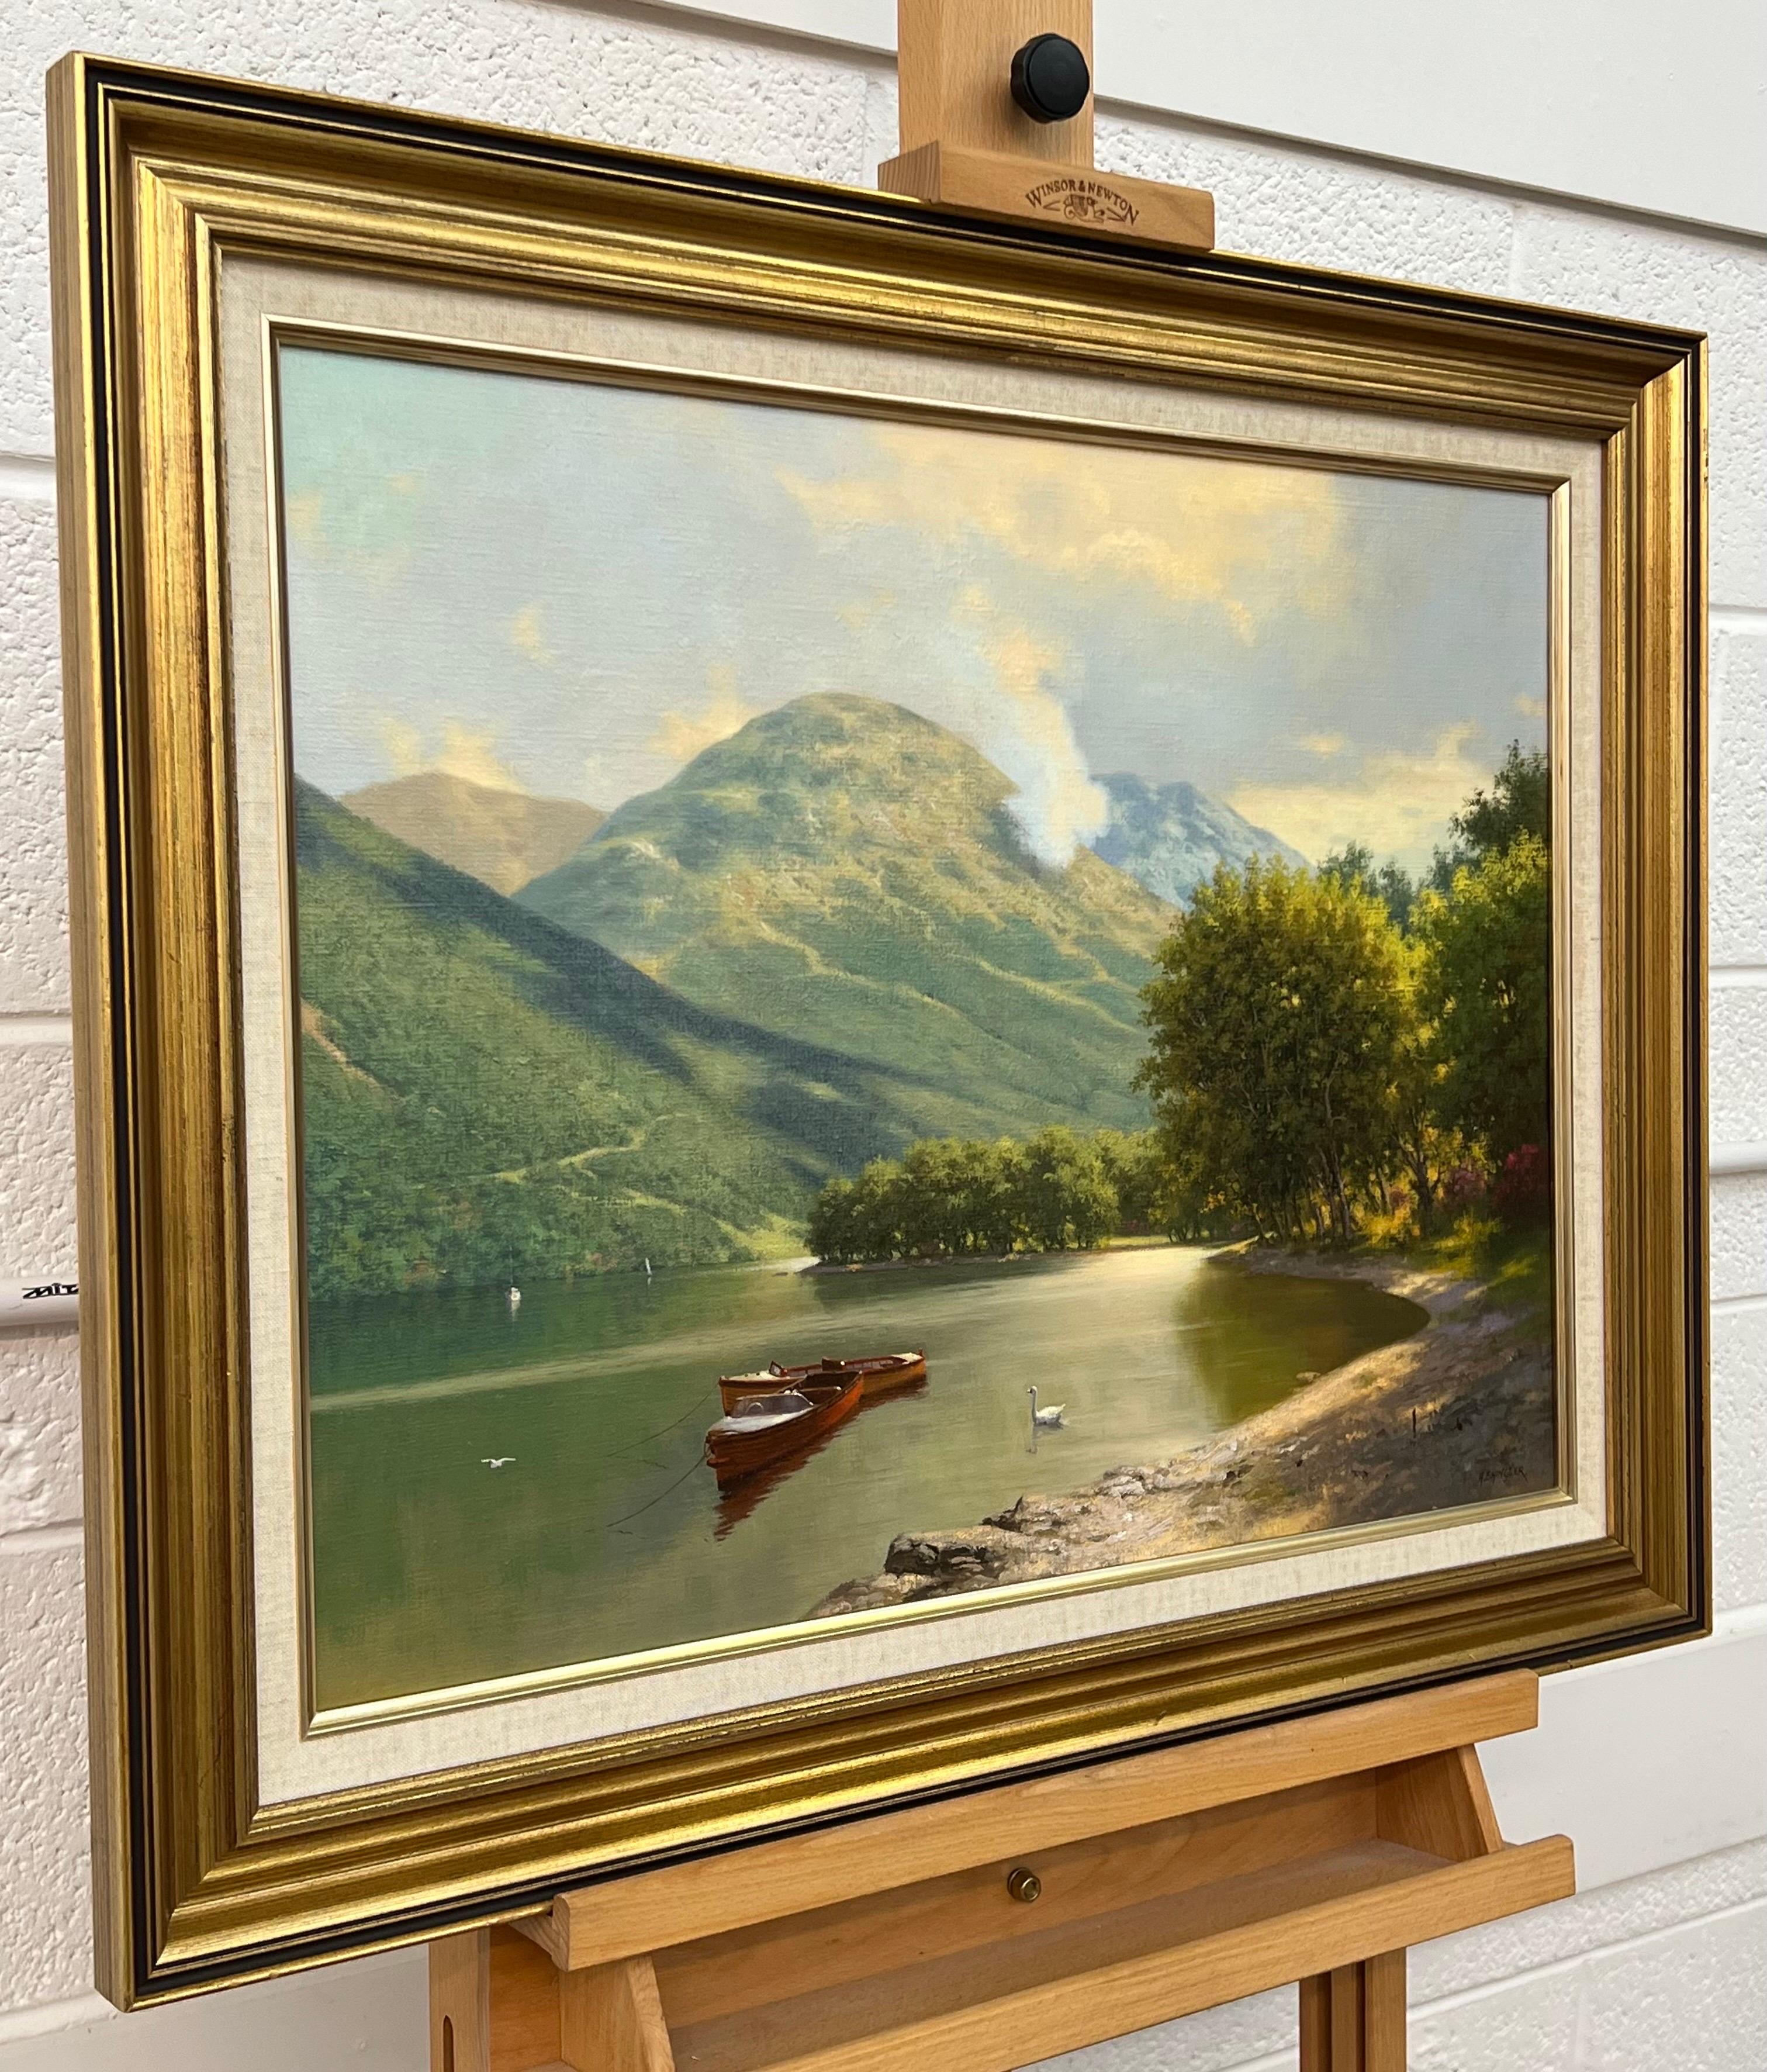 Tranquil Lake Scene with Boats & Swan in the Mountains of the Scottish Highlands - Painting by Howard Shingler